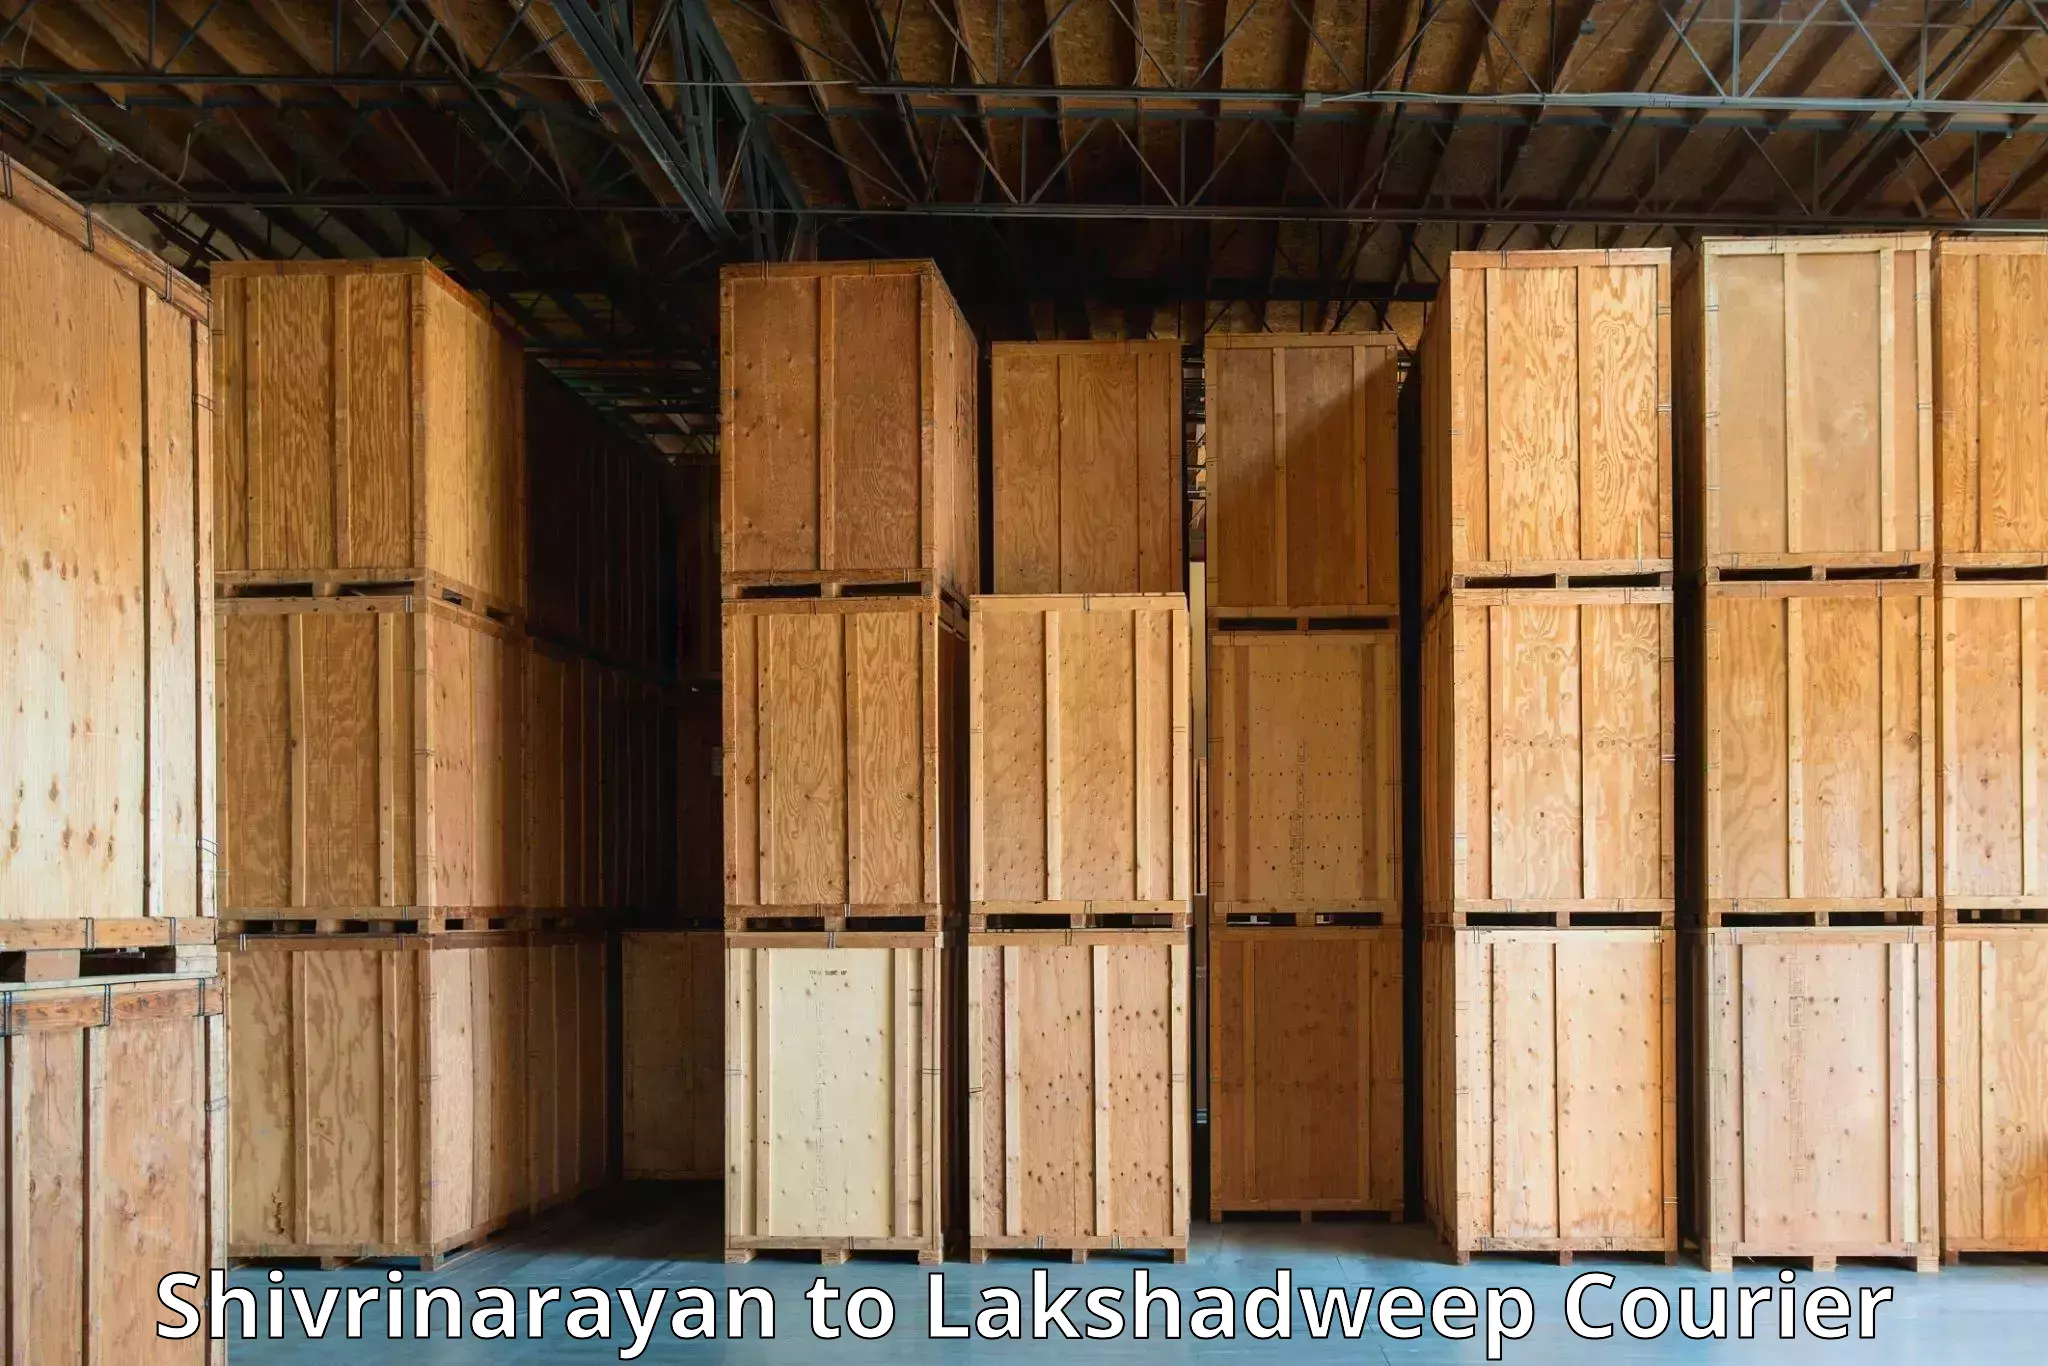 Express delivery network in Shivrinarayan to Lakshadweep